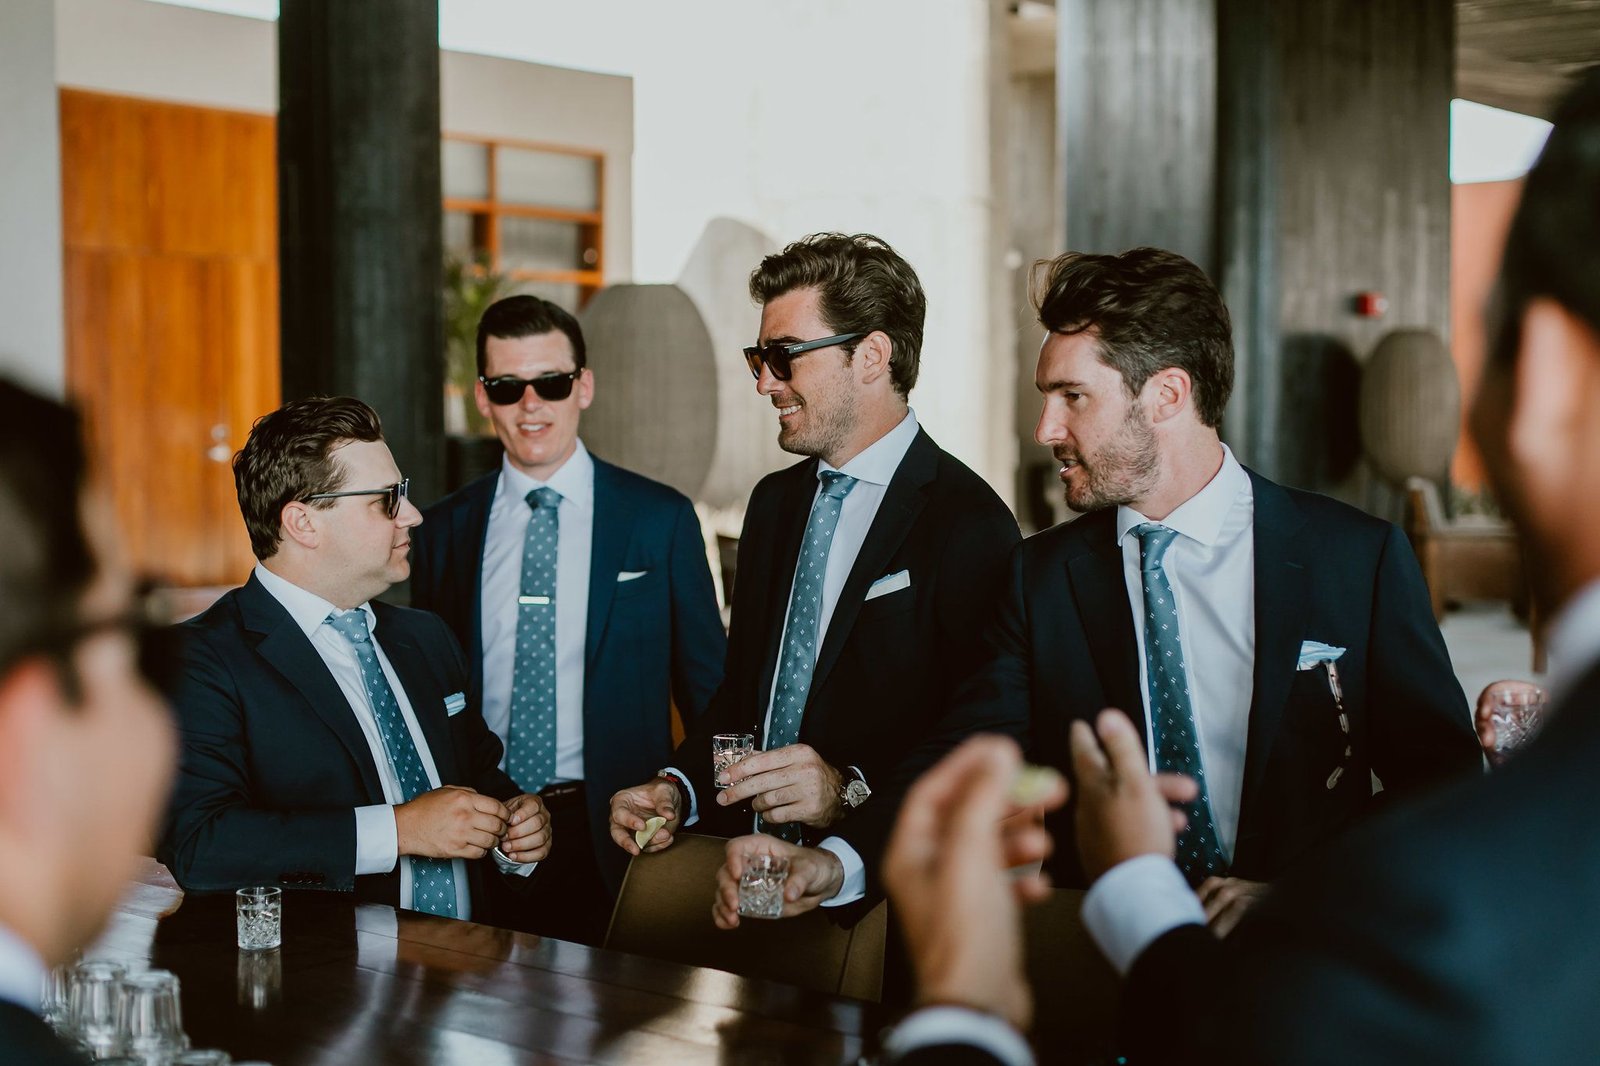 The groom and groomsmen having a shot right before the ceremony begins. This photo was taken at the Lobby bar at The Cape by THompson Hotels in Cabo San Lucas. Wedding Planning was done by Cabo Wedding Services.